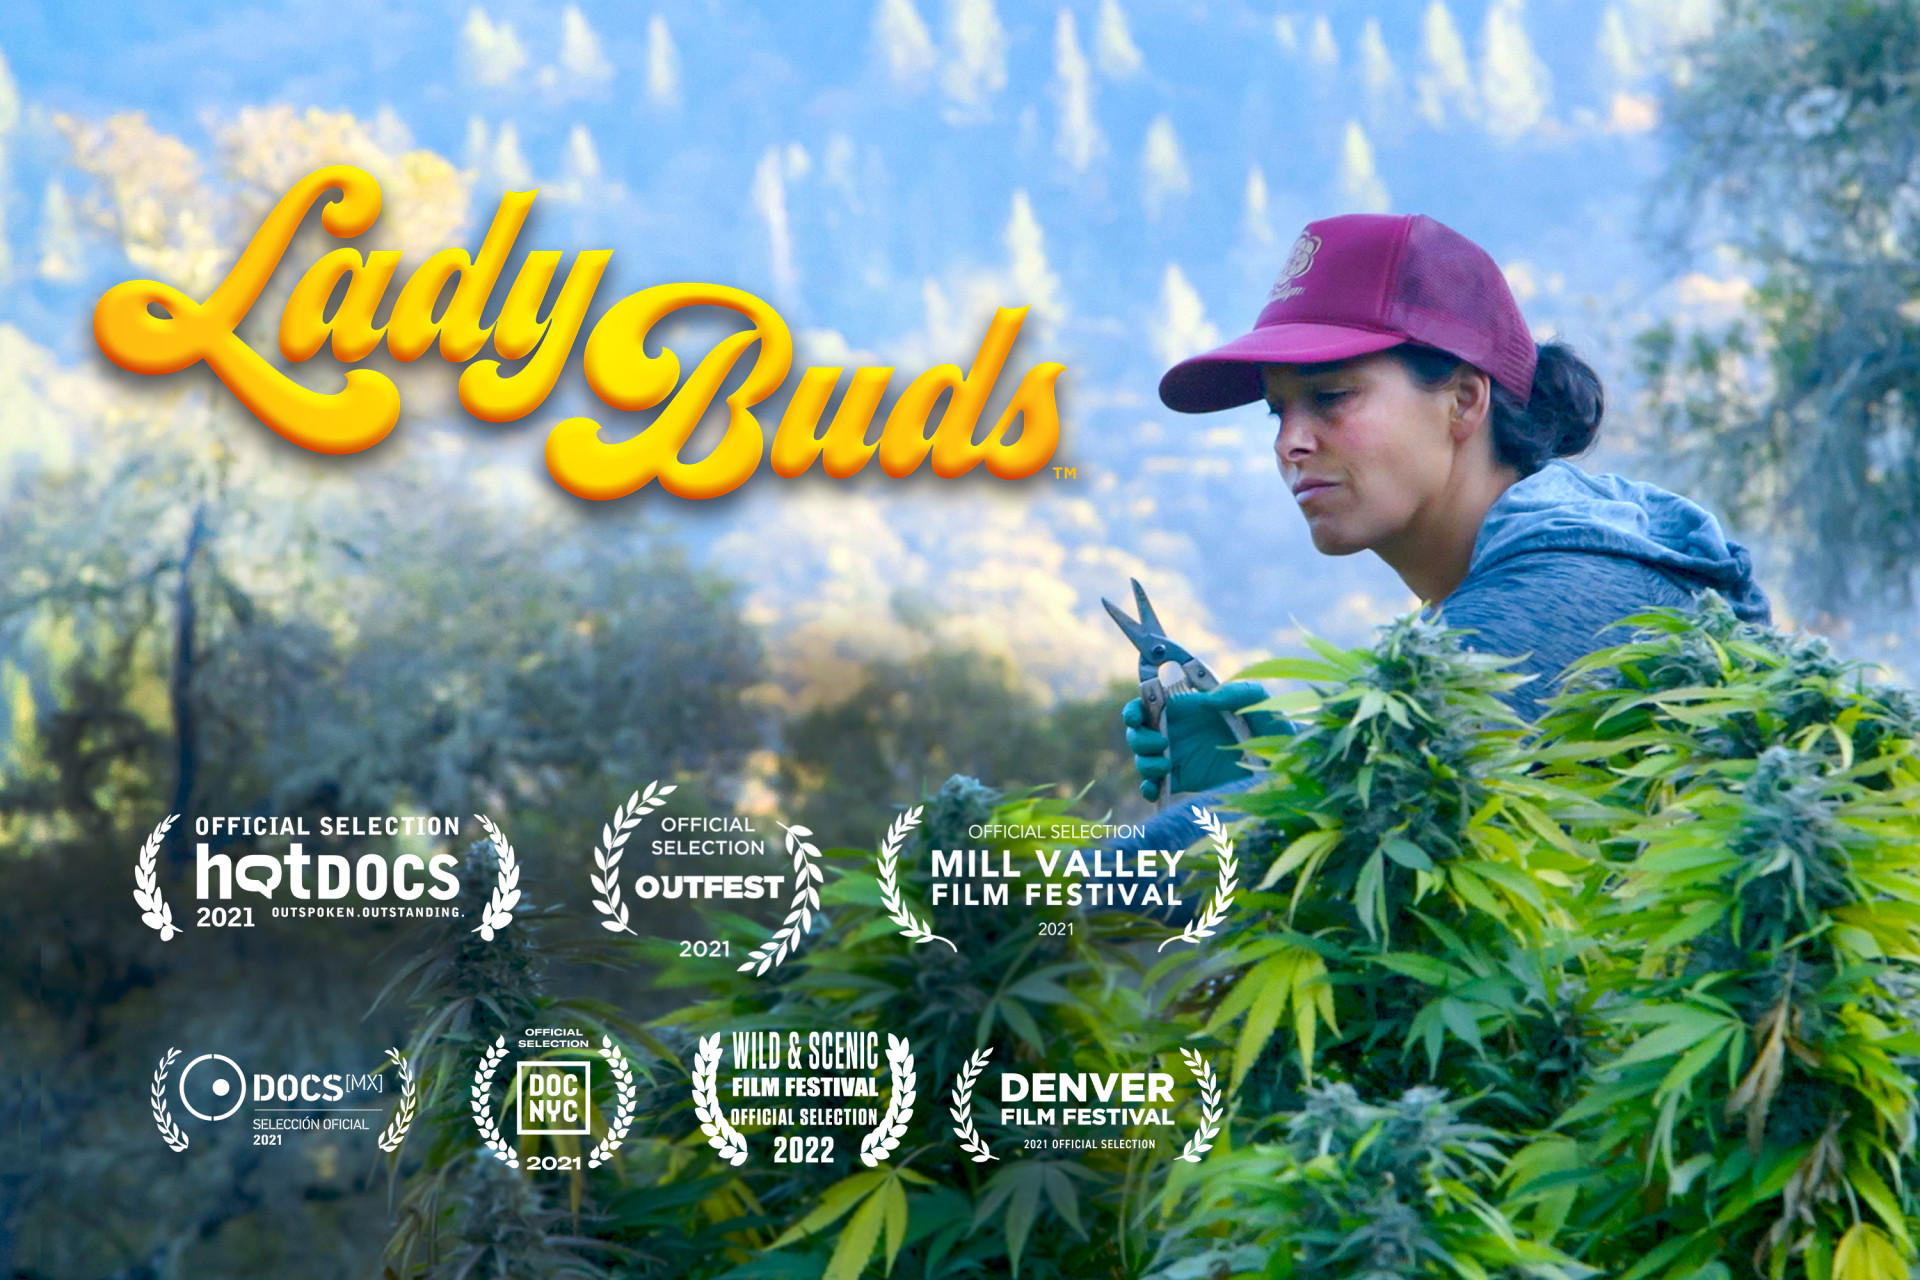 "Lady Buds" Doc Shares Stories of Women in Cannabis